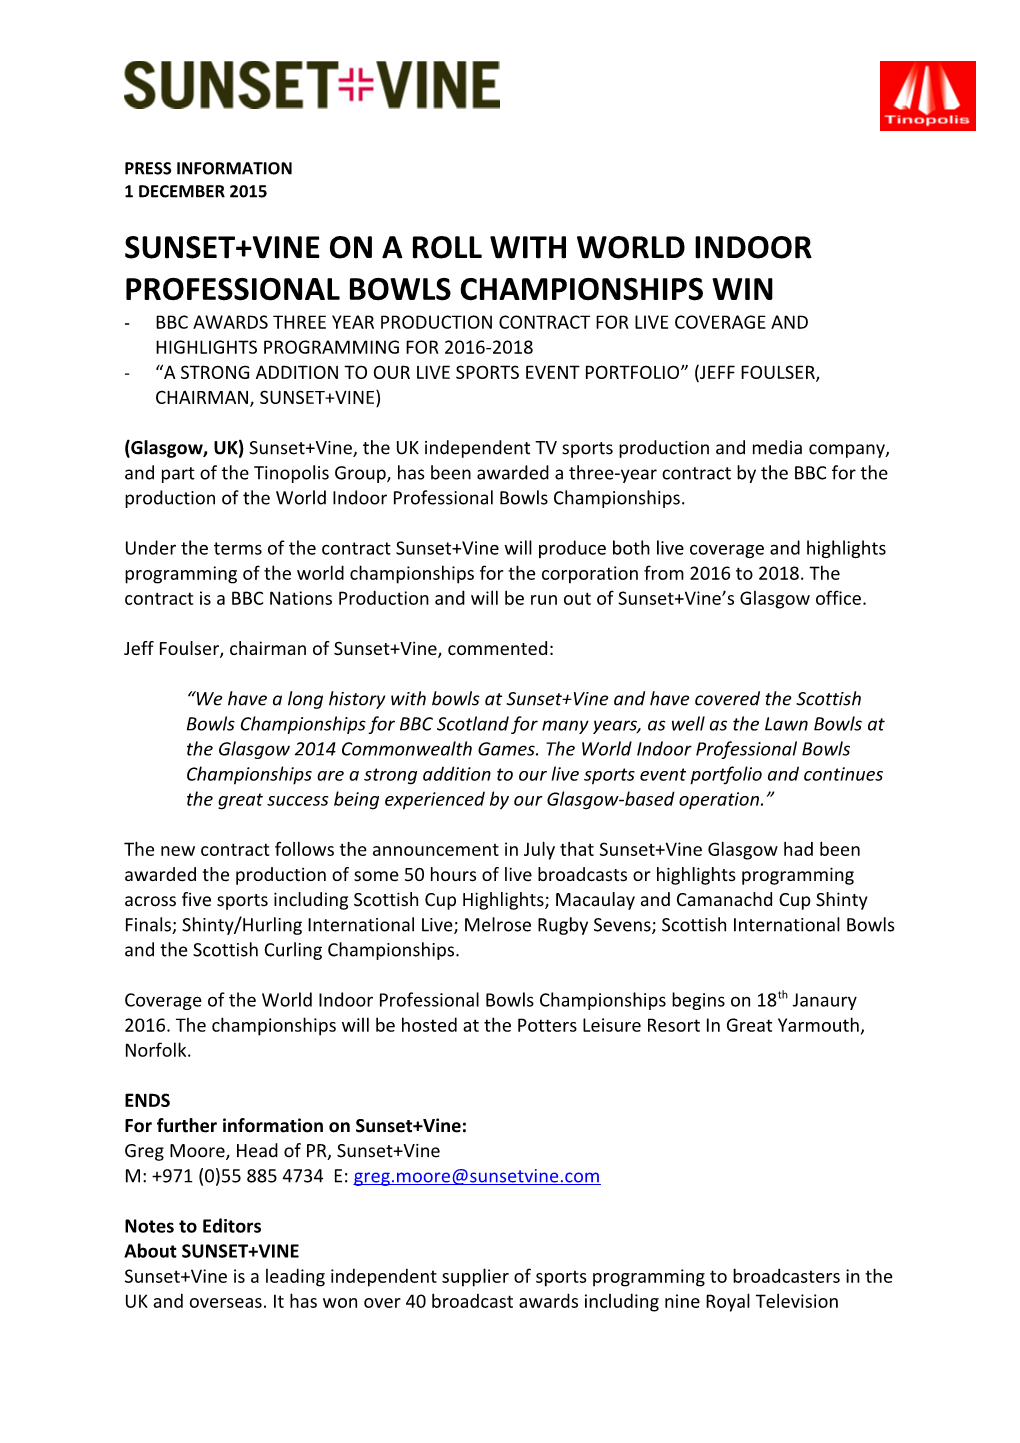 Sunset+Vine on a Roll with World Indoor Professional Bowls Championships Win